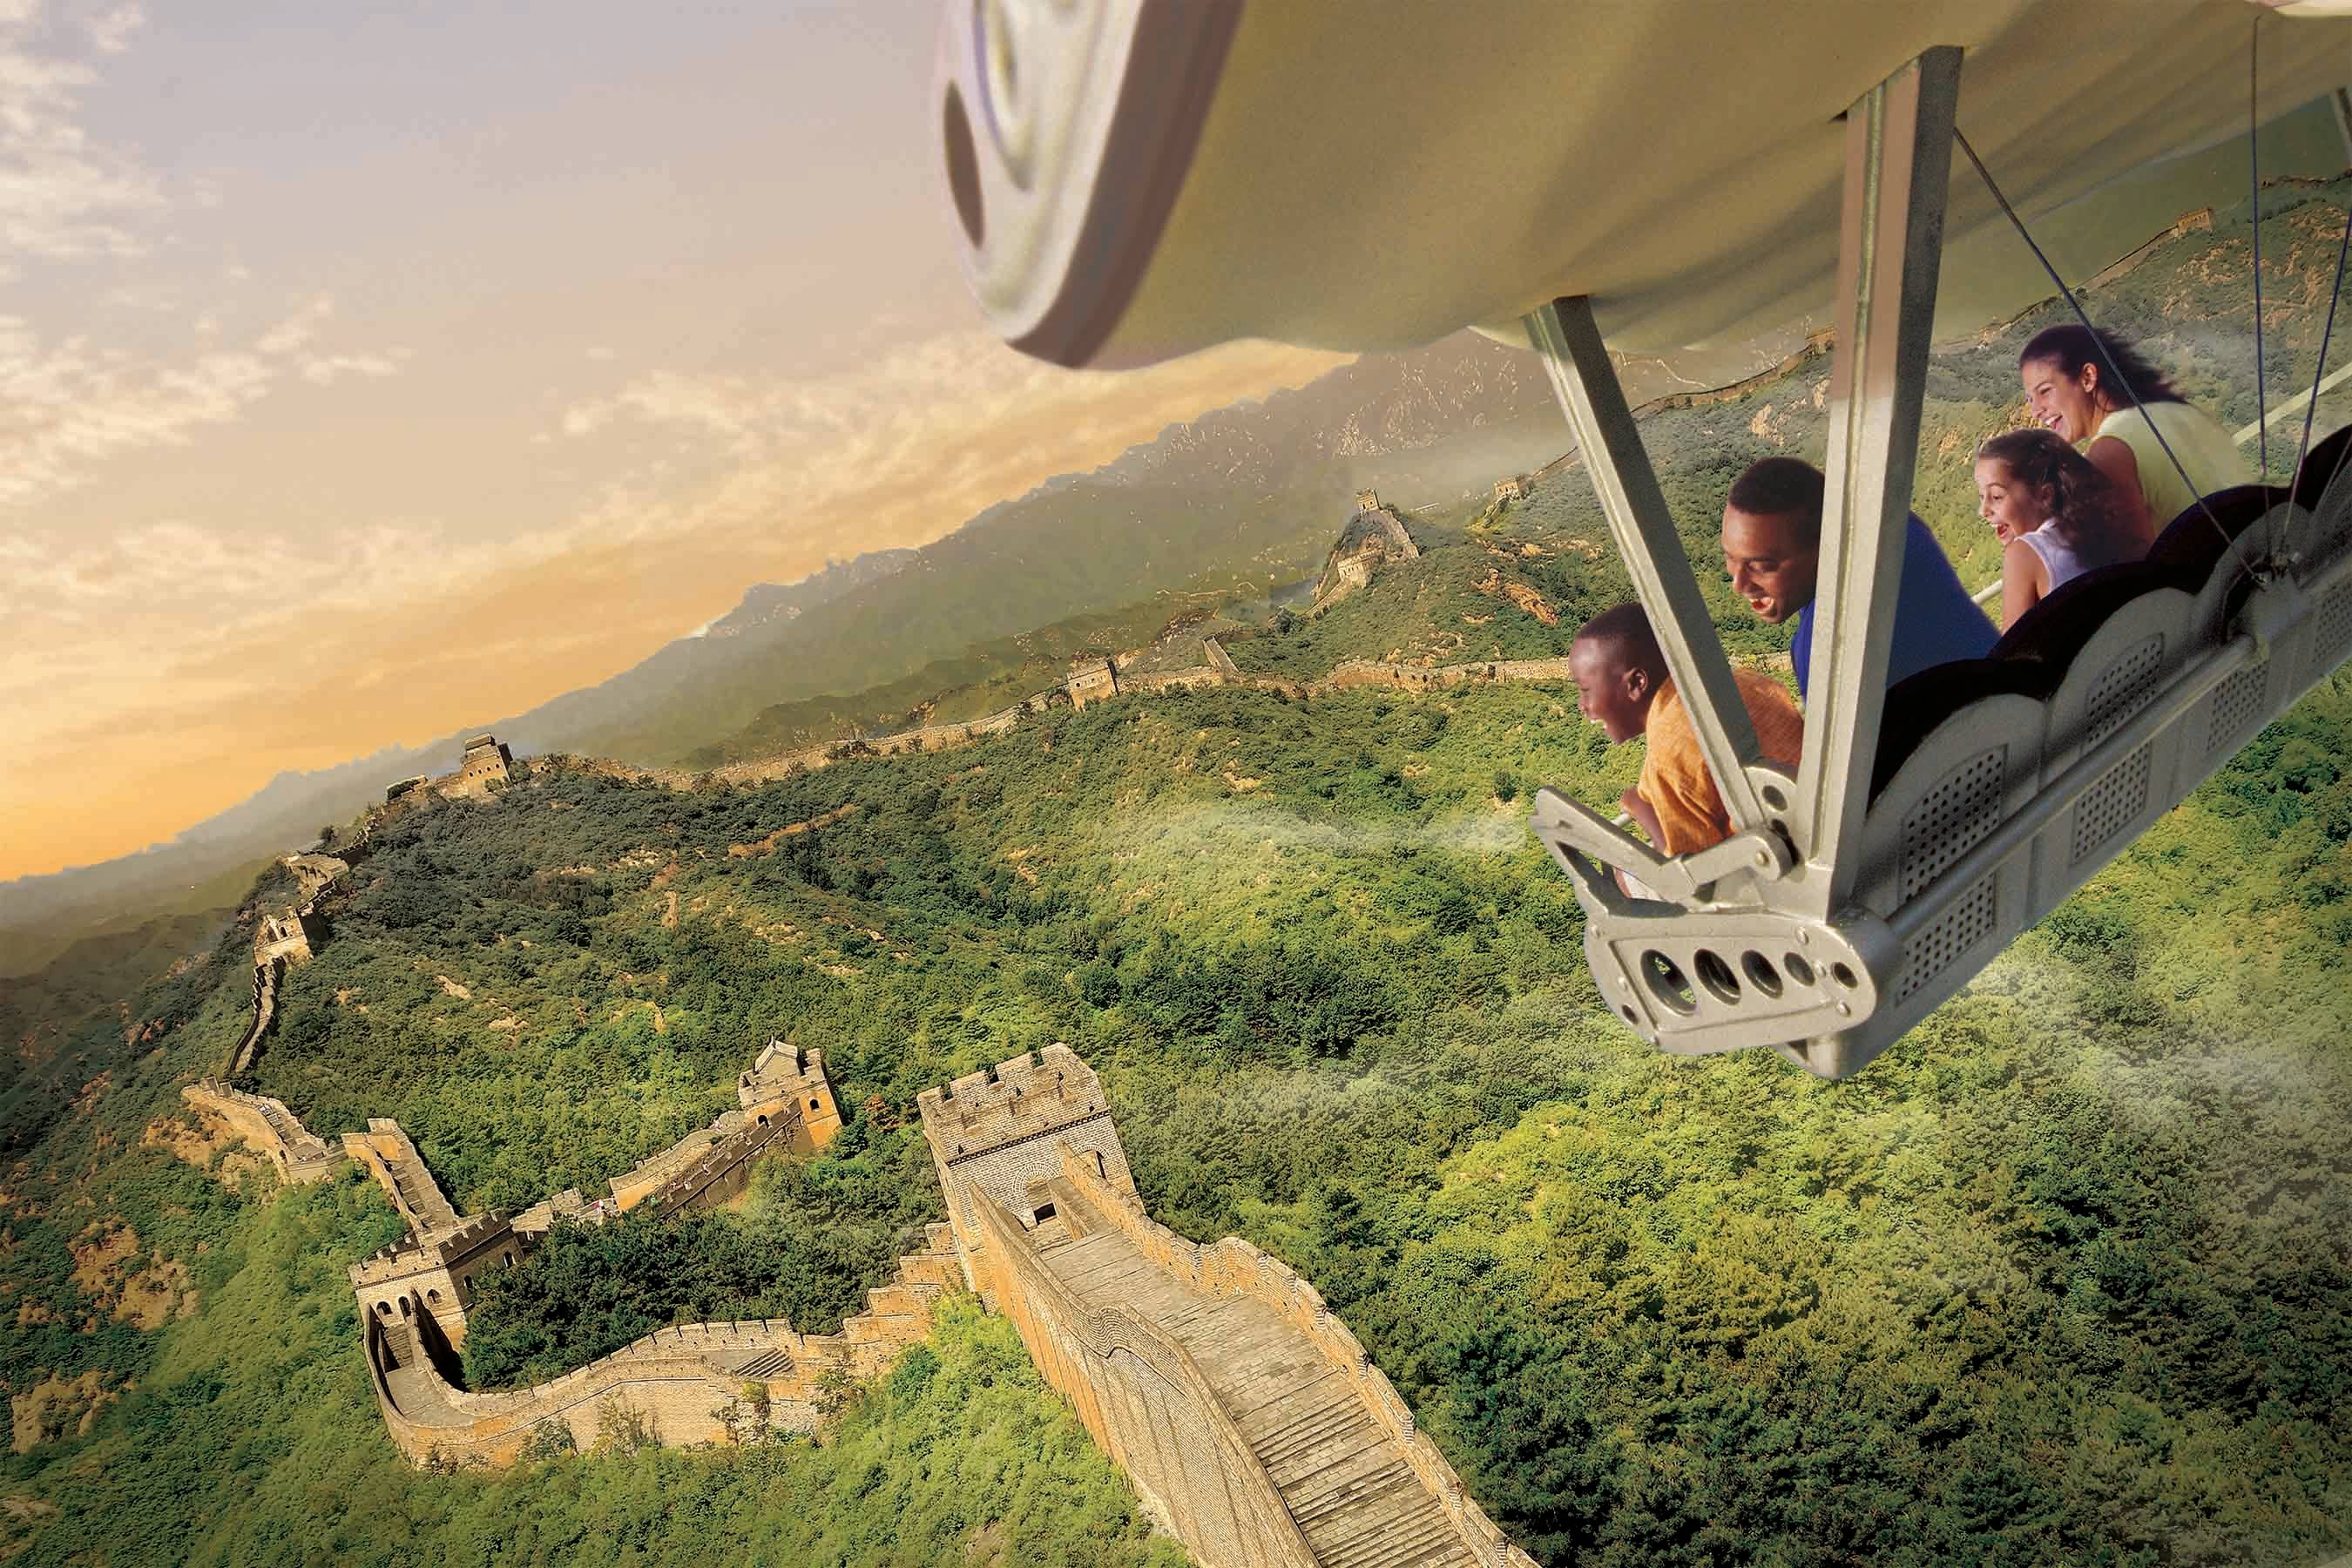 Soarin' to close early to prepare for new Soarin' Around the World